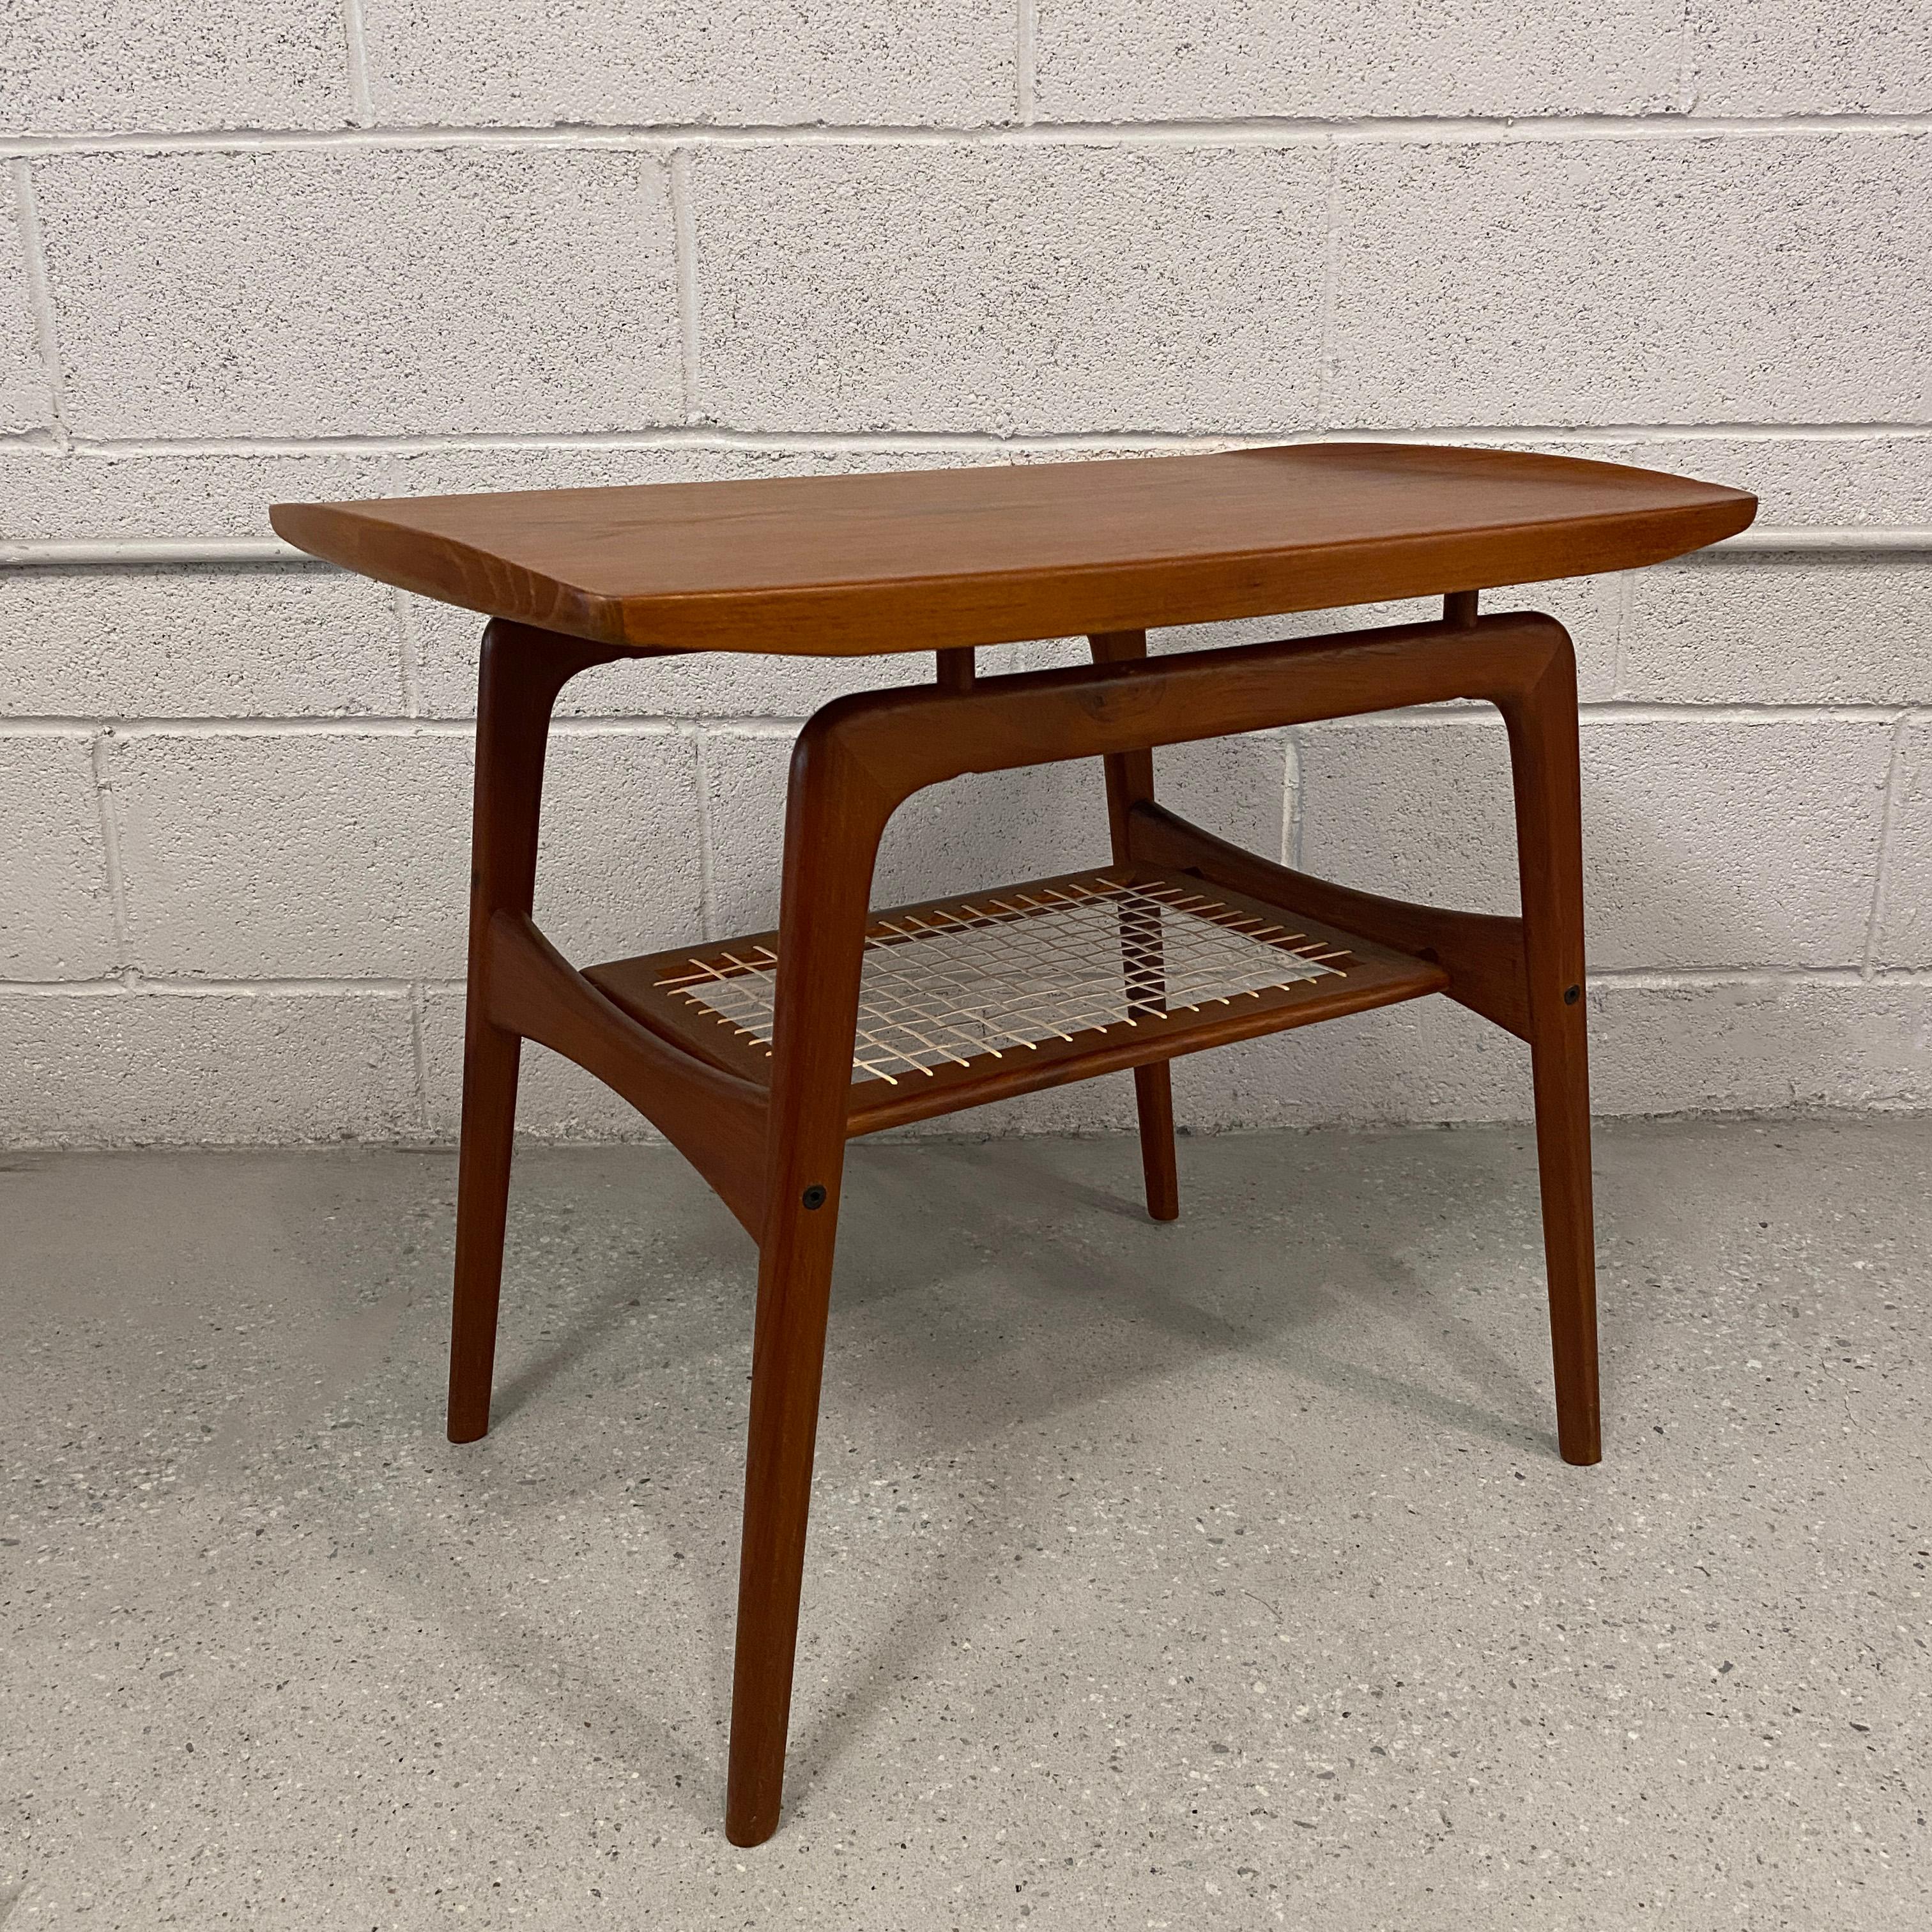 Danish modern, tiered teak side table by Arne Hovmand-Olsen features a floating top with upturned edges and lower, caned tier at 11.5 inches height.